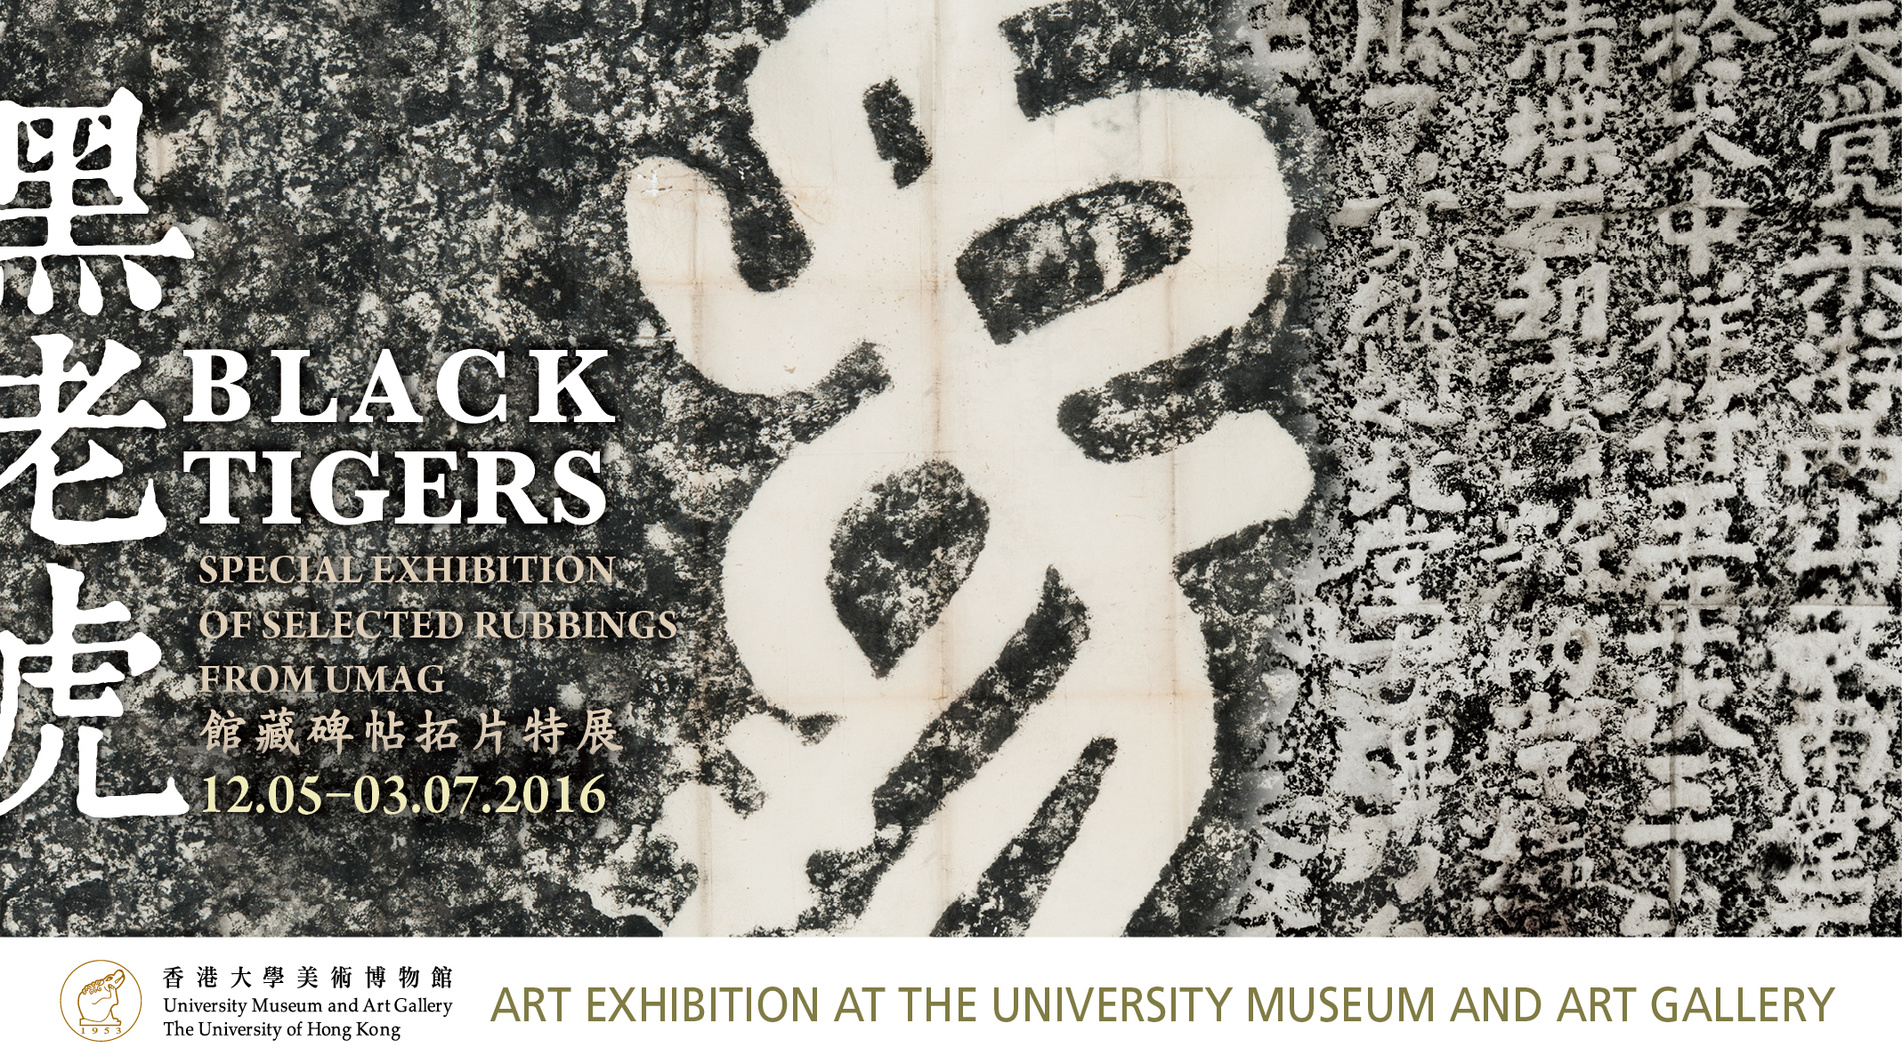 Black Tigers: Special Exhibition of Selected Rubbings from UMAG